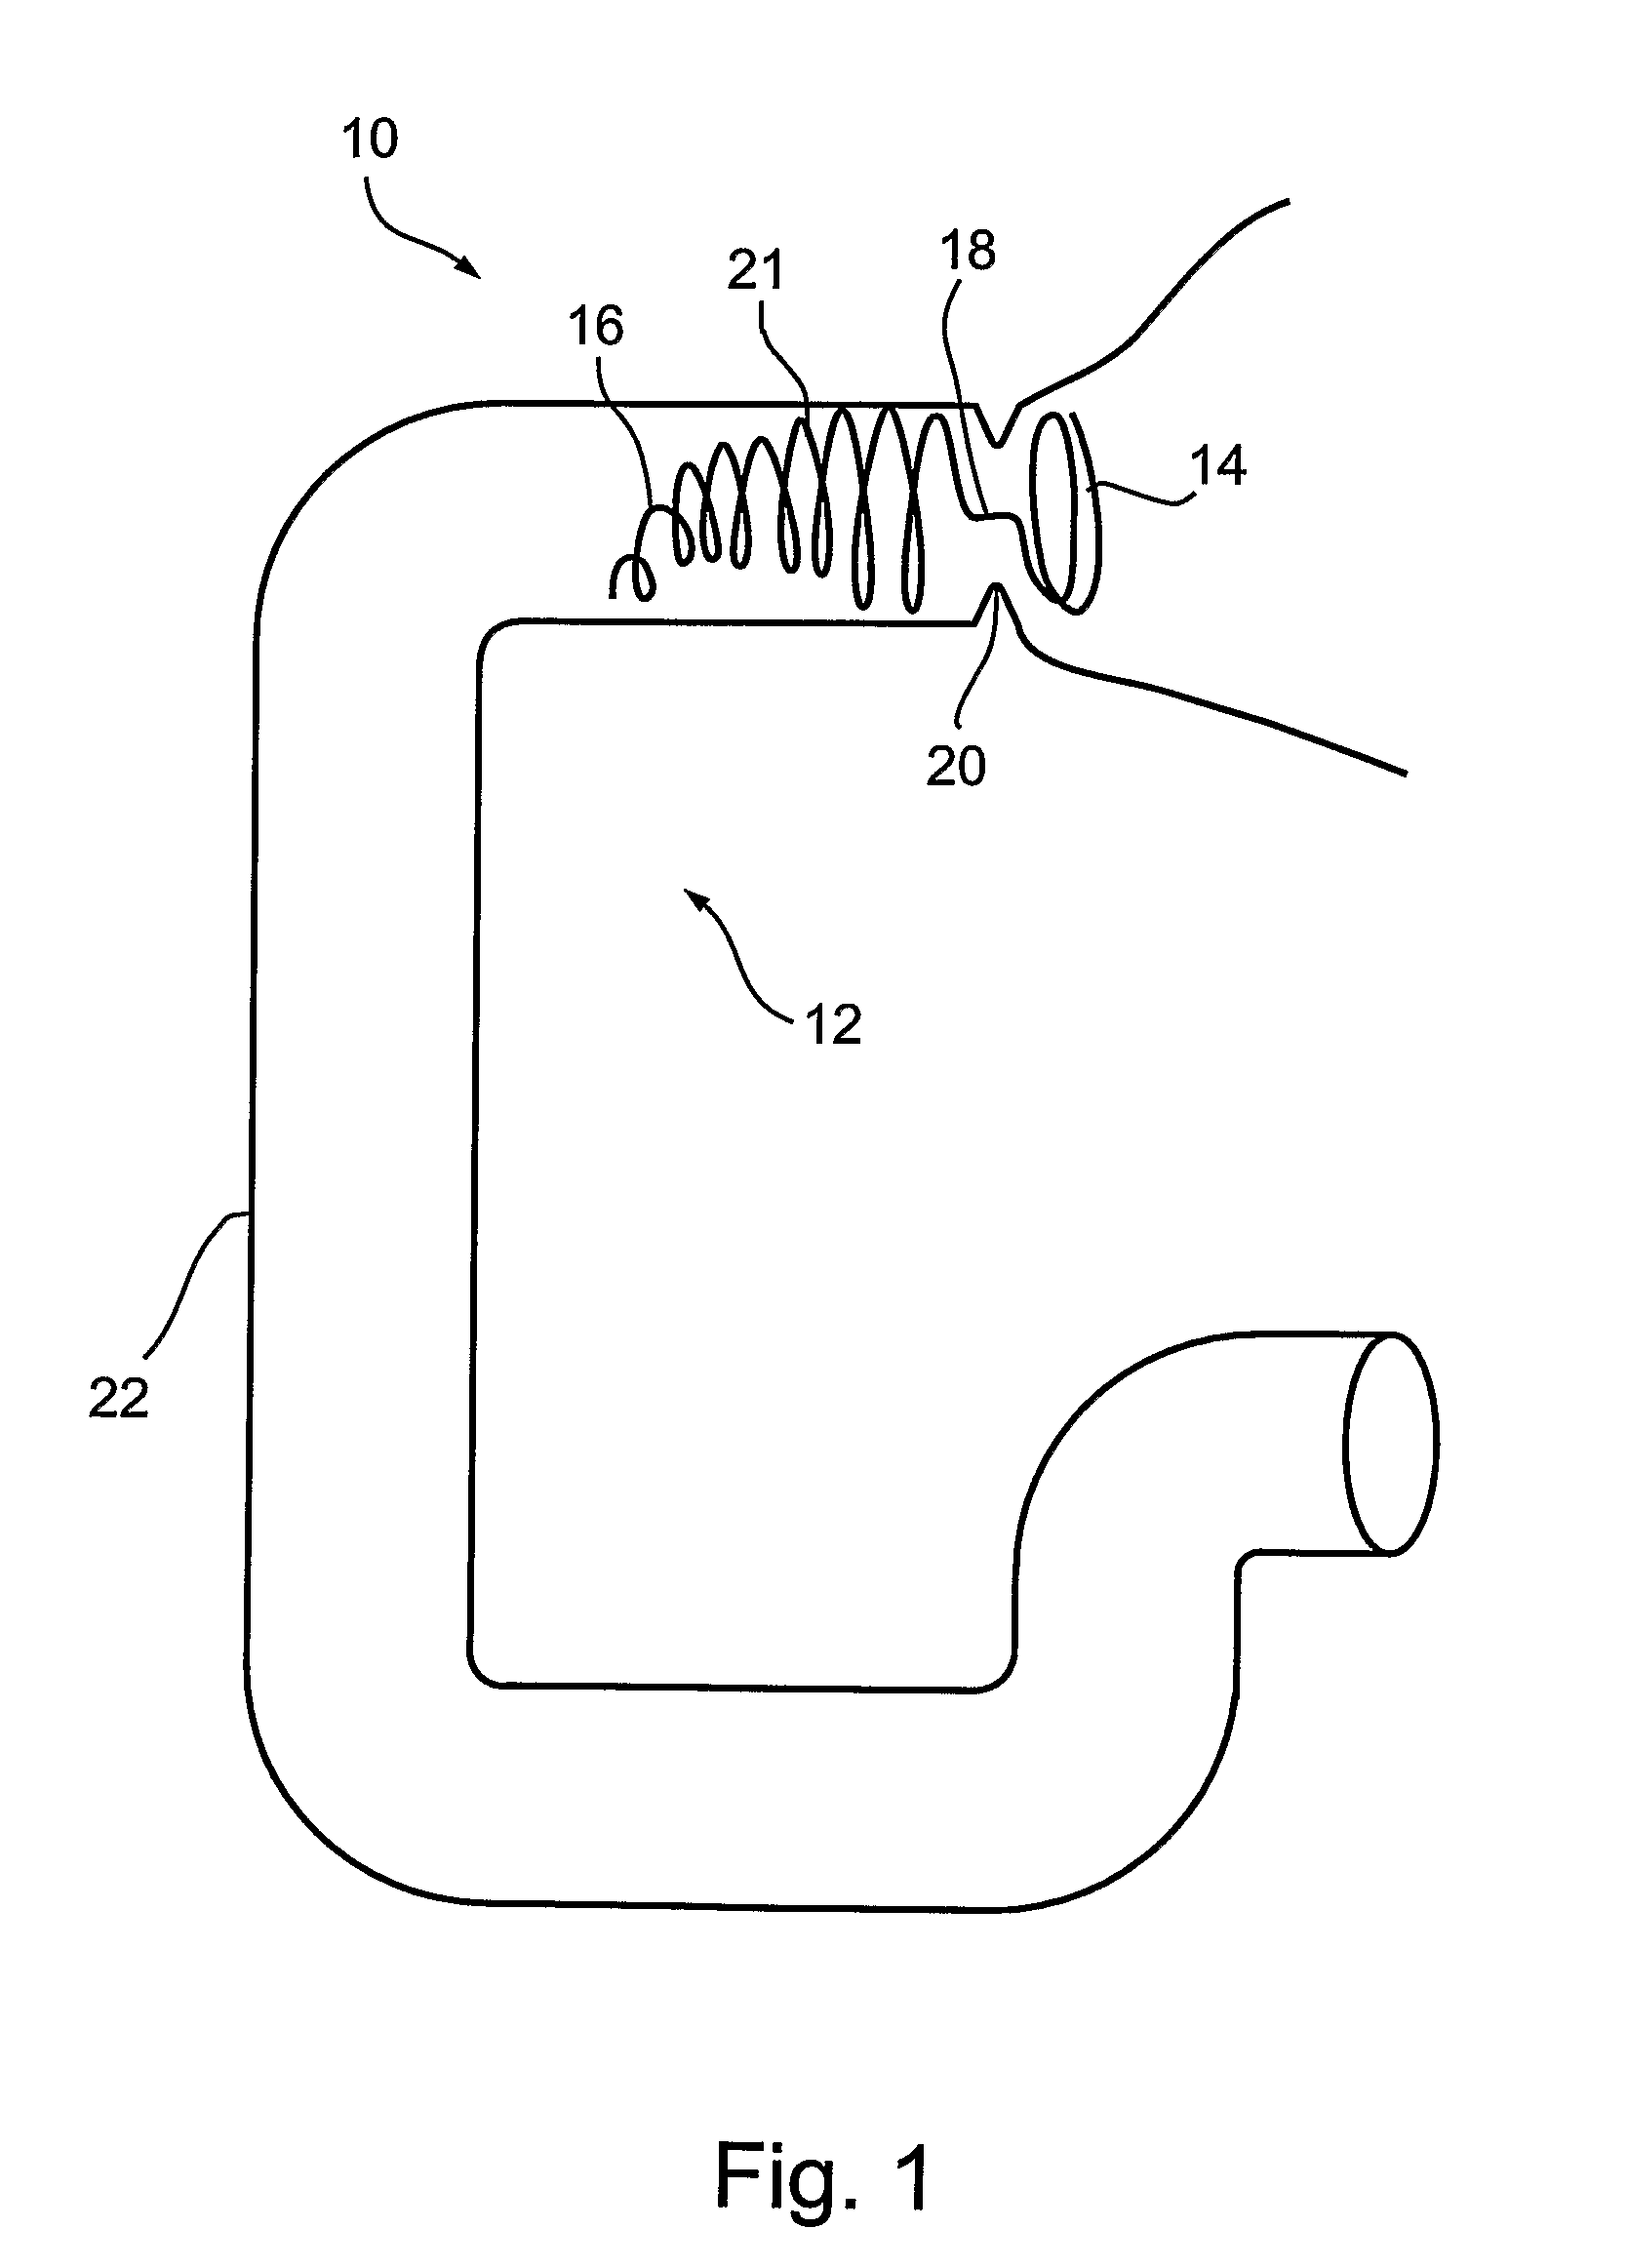 Duodenal stimulation devices and methods for the treatment of conditions relating to eating disorders